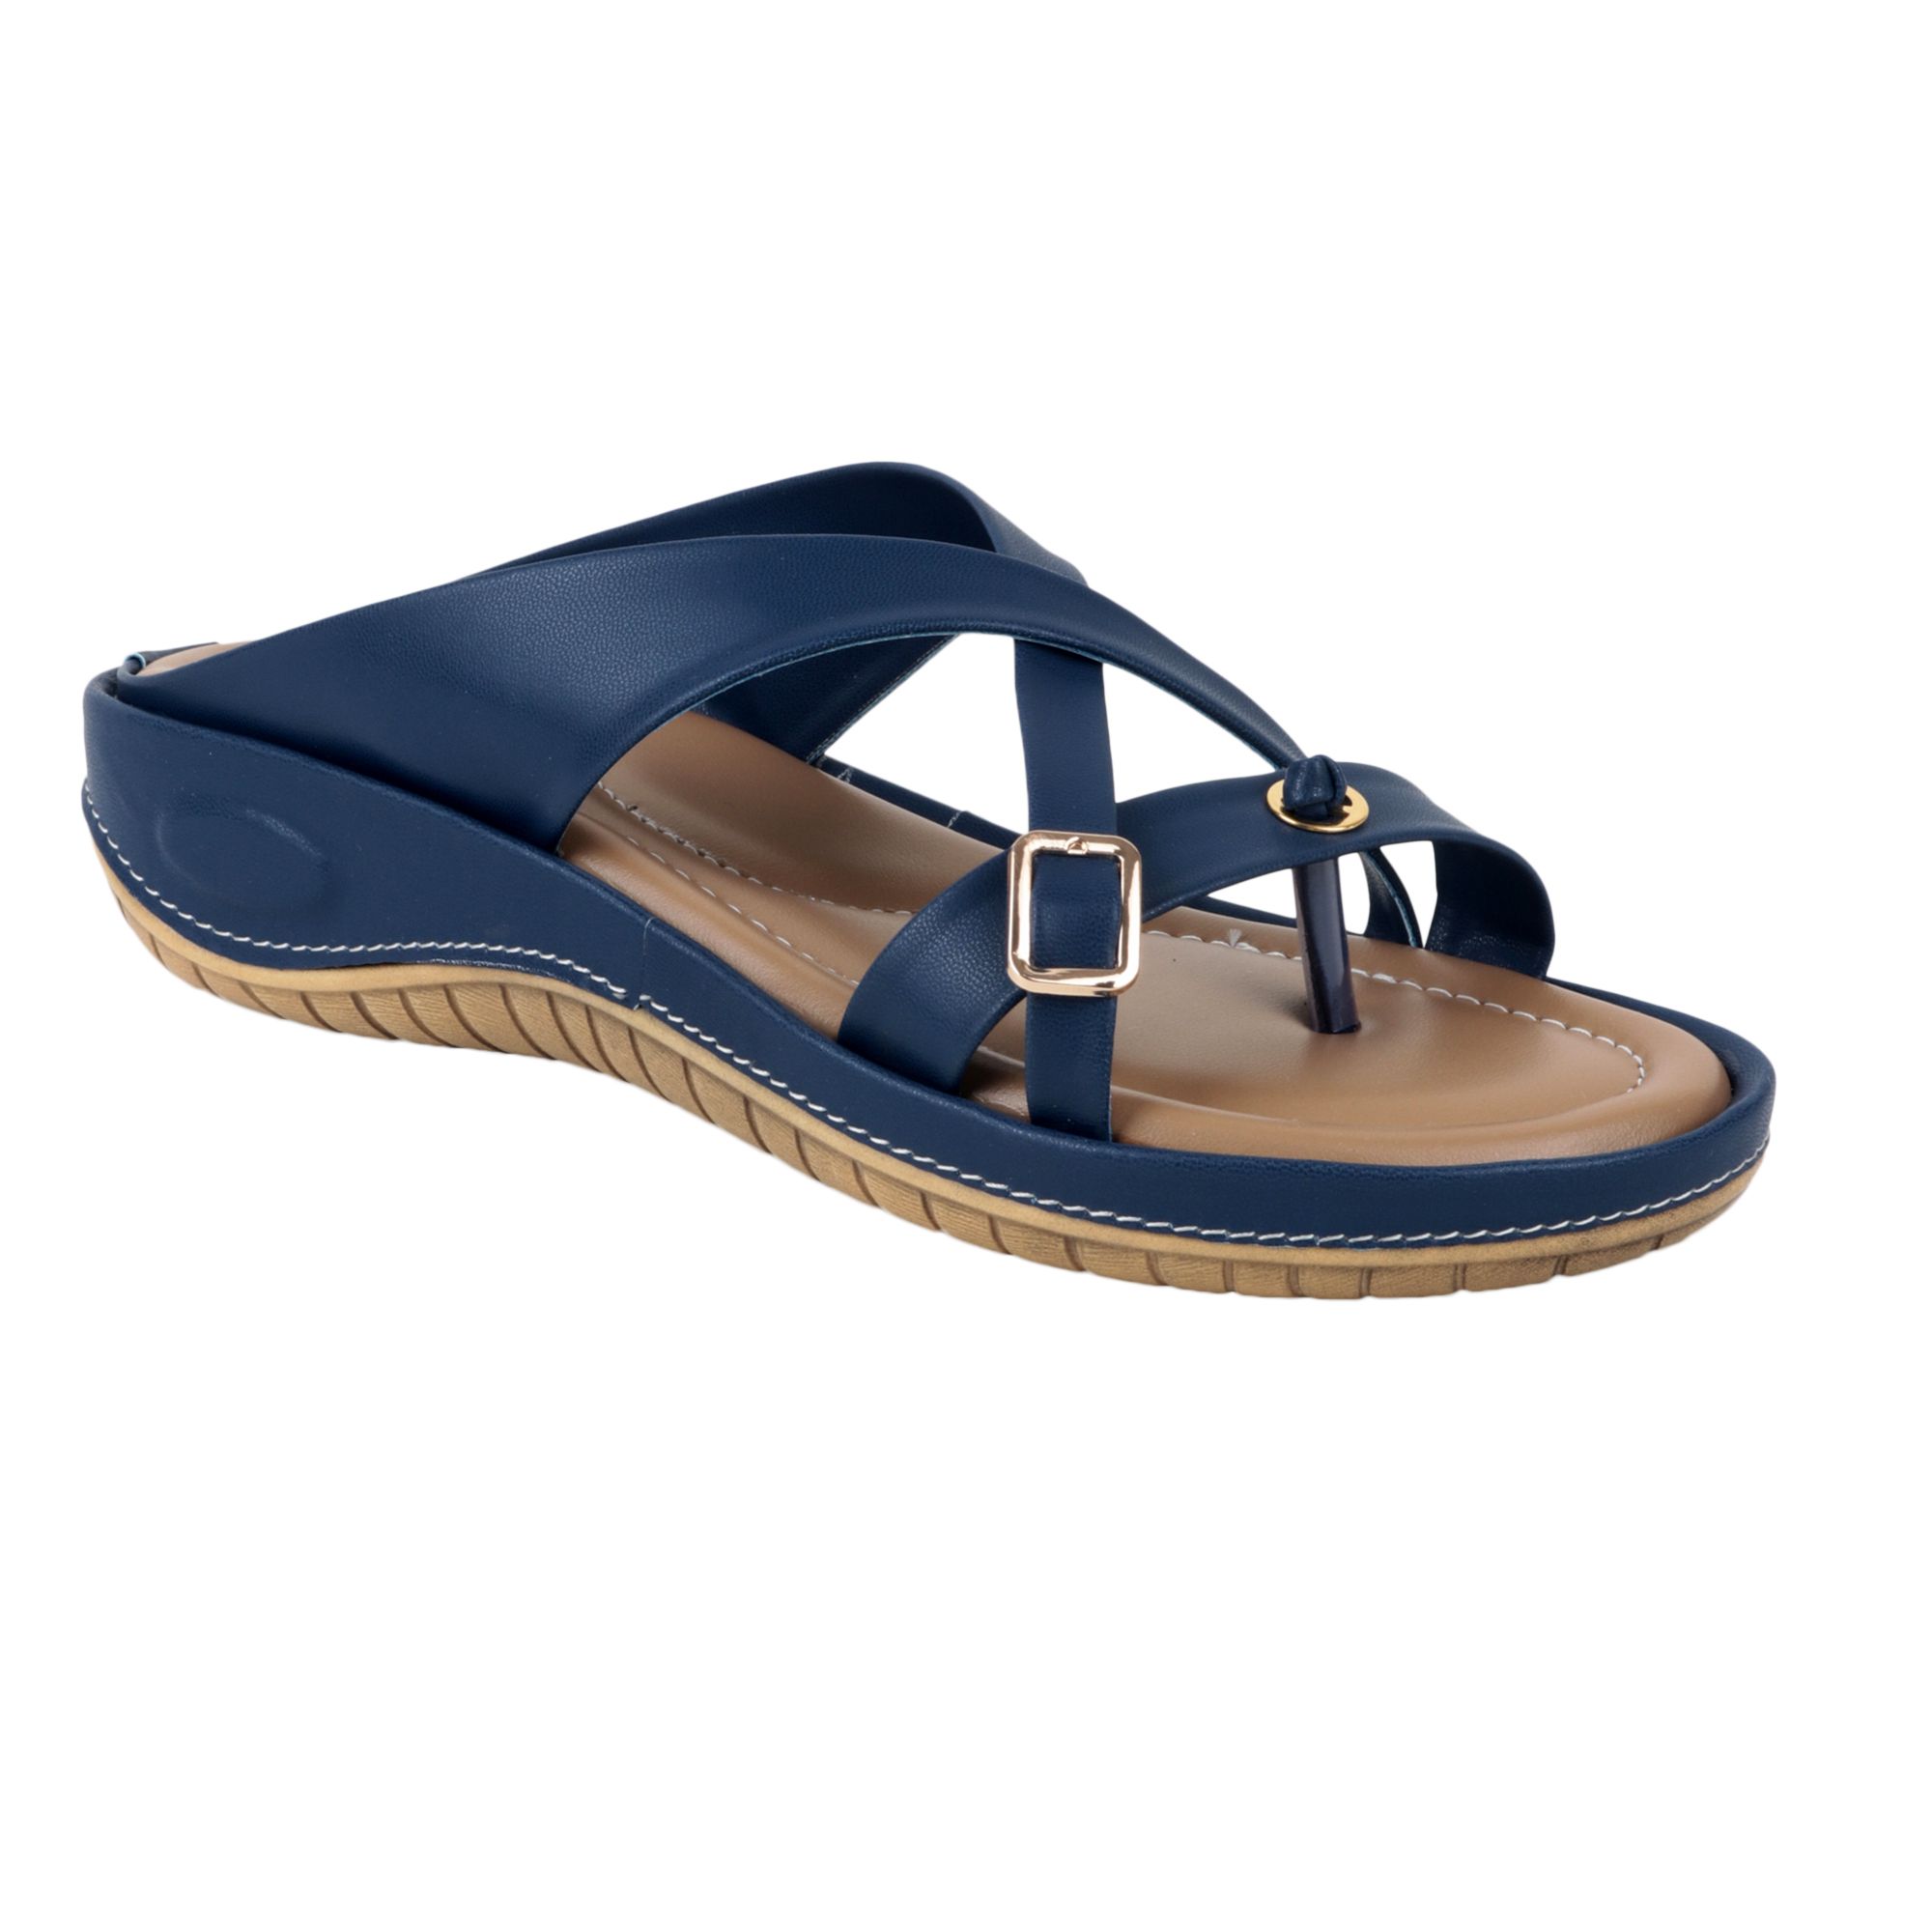 GUNJ Blue Flats Price in India- Buy GUNJ Blue Flats Online at Snapdeal